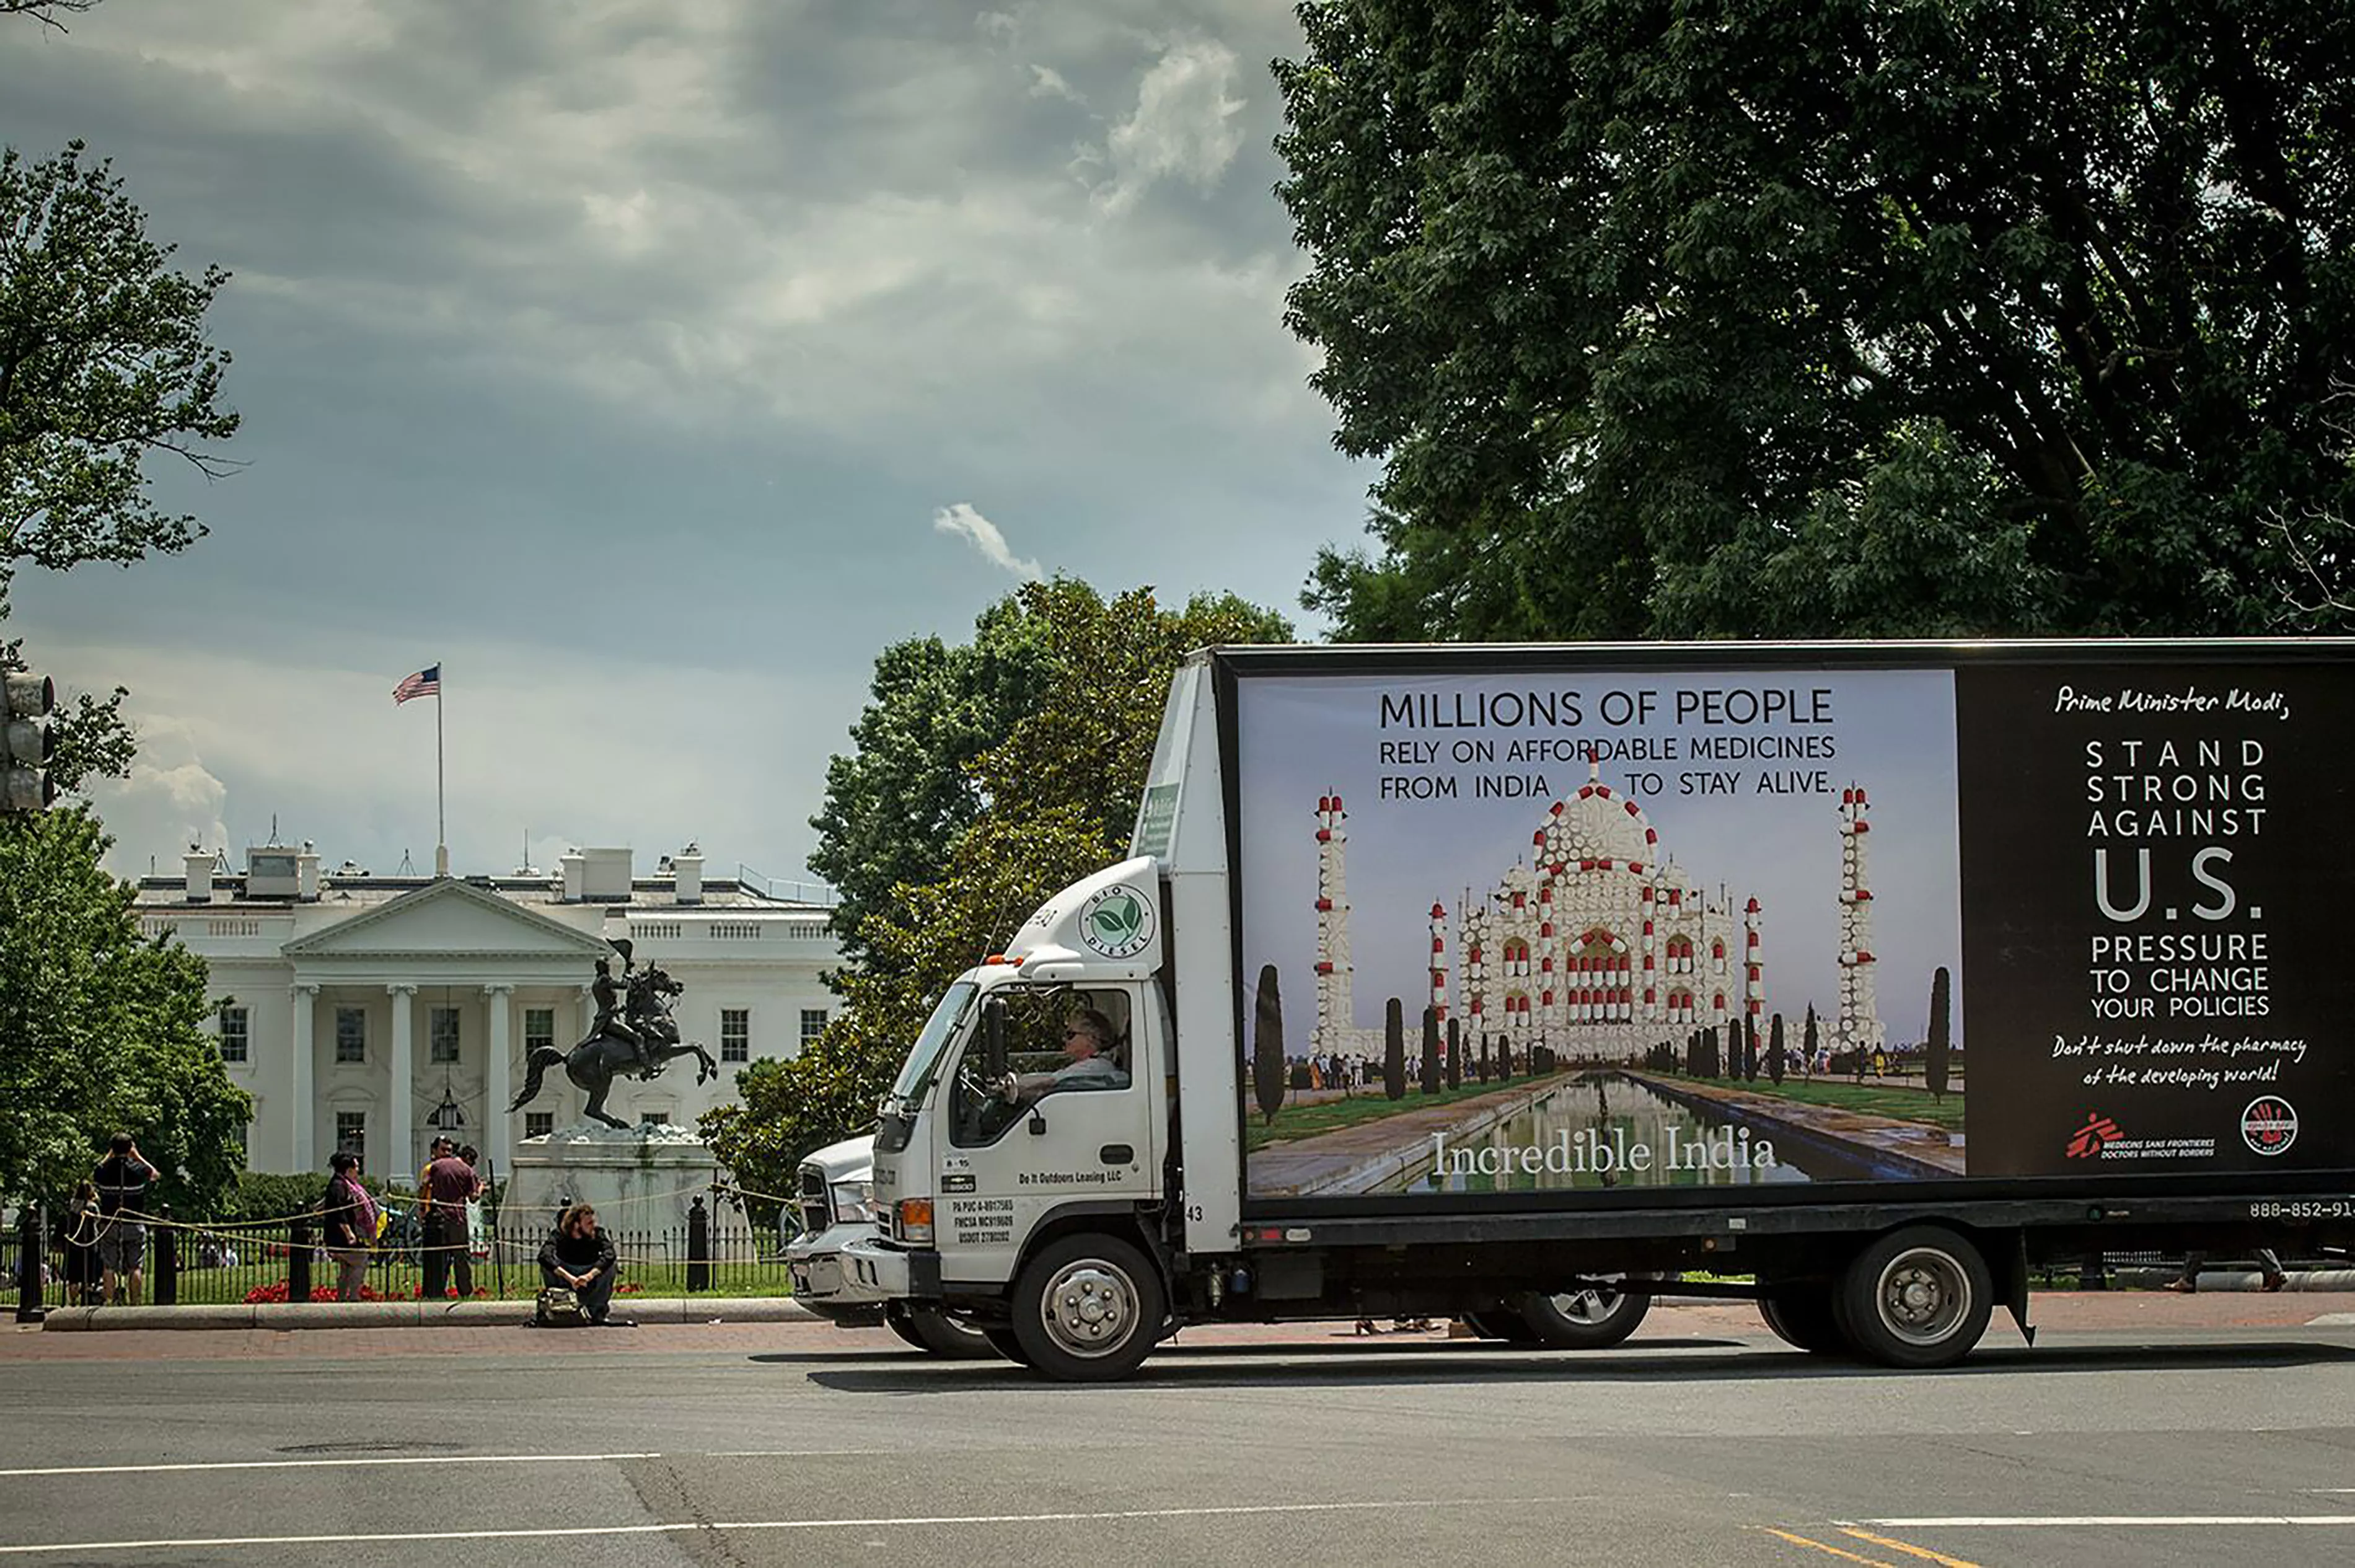 Doctors Without Borders mobile billboard is seen near the White House in Washington DC during India's Prime Minister Modi's visit June 7, 2016.